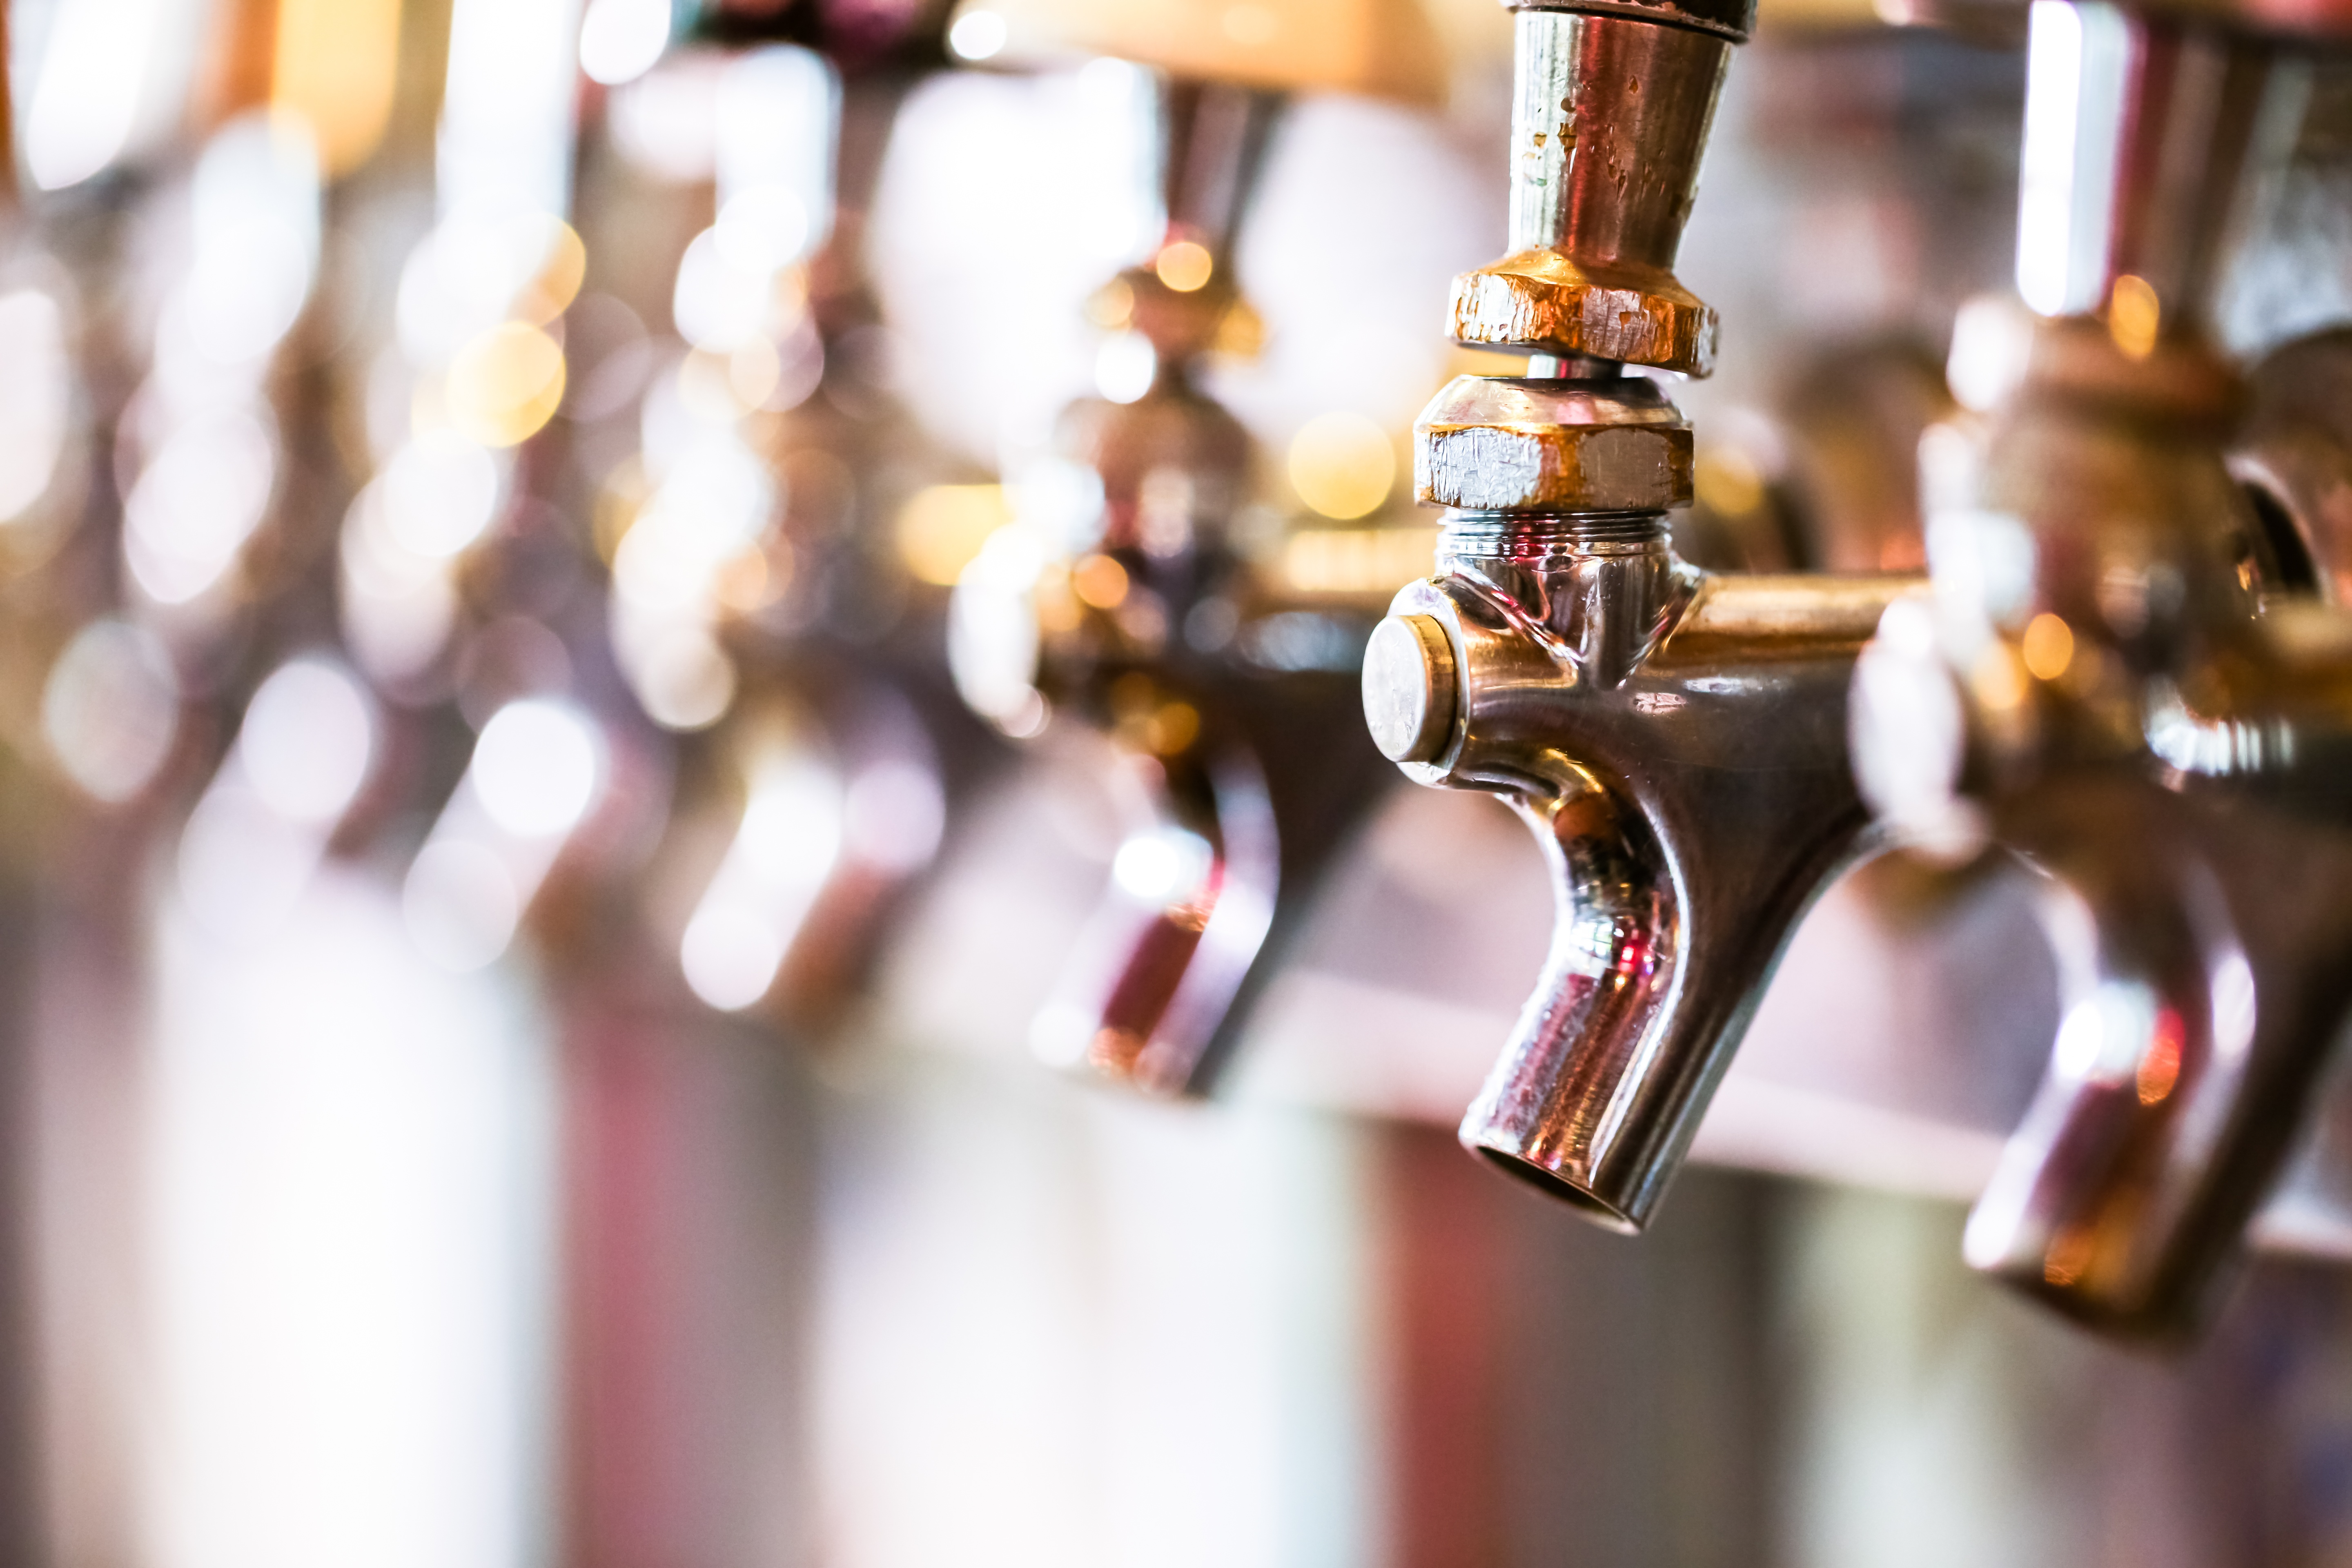 Should You Install Draft Beer Flow Meters at Your Bar?